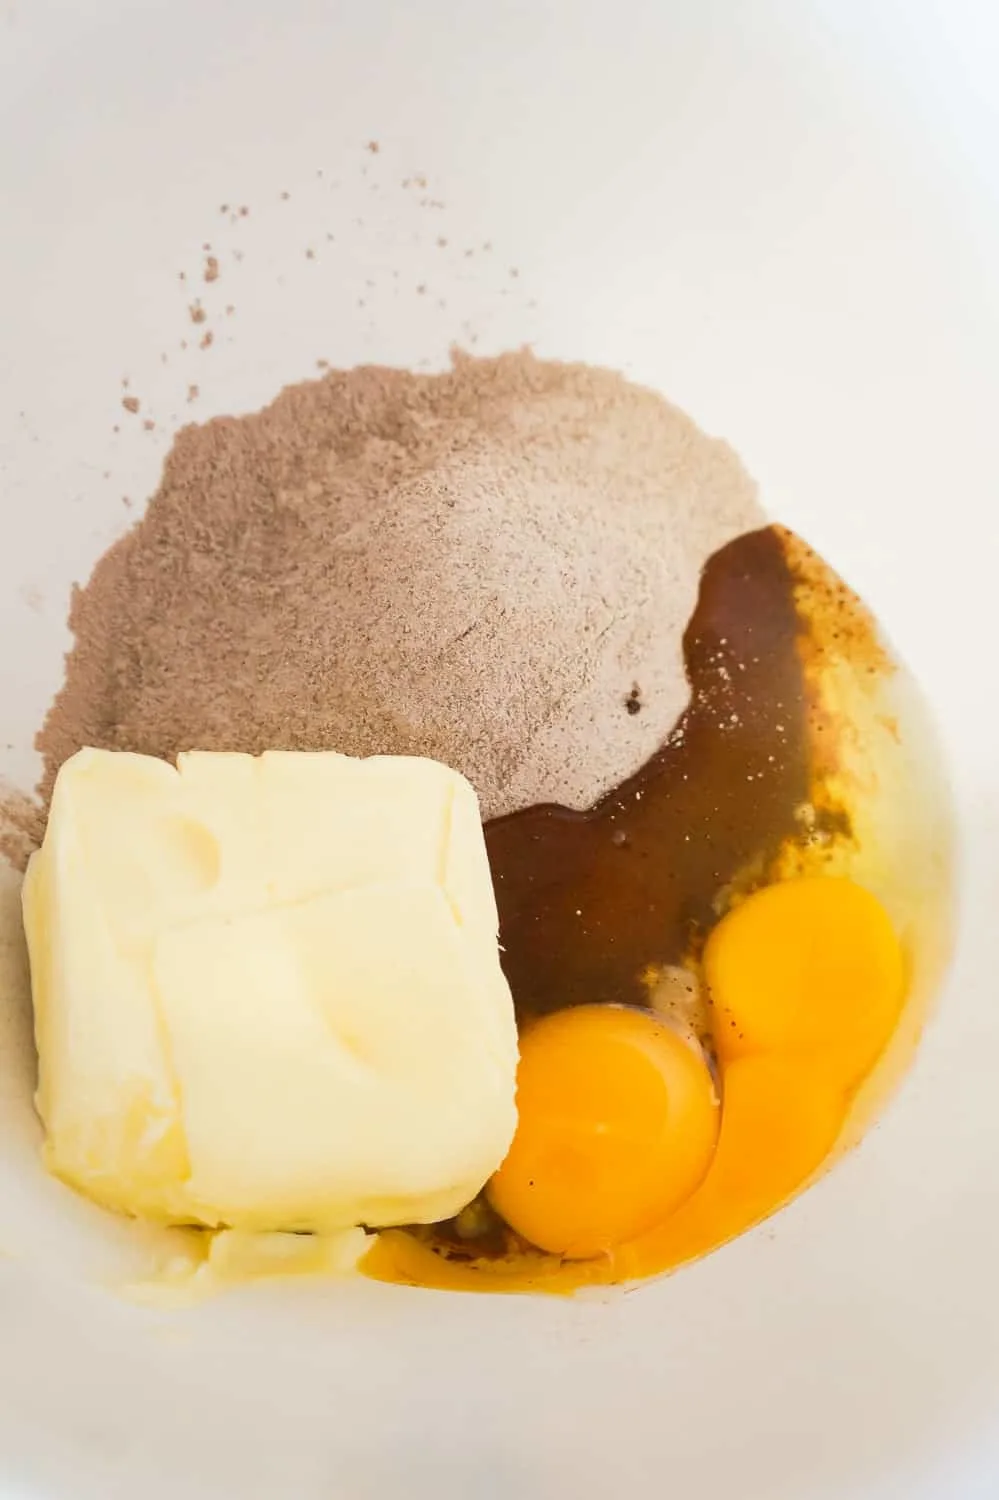 butter, chocolate pudding mix and eggs in a mixing bowl